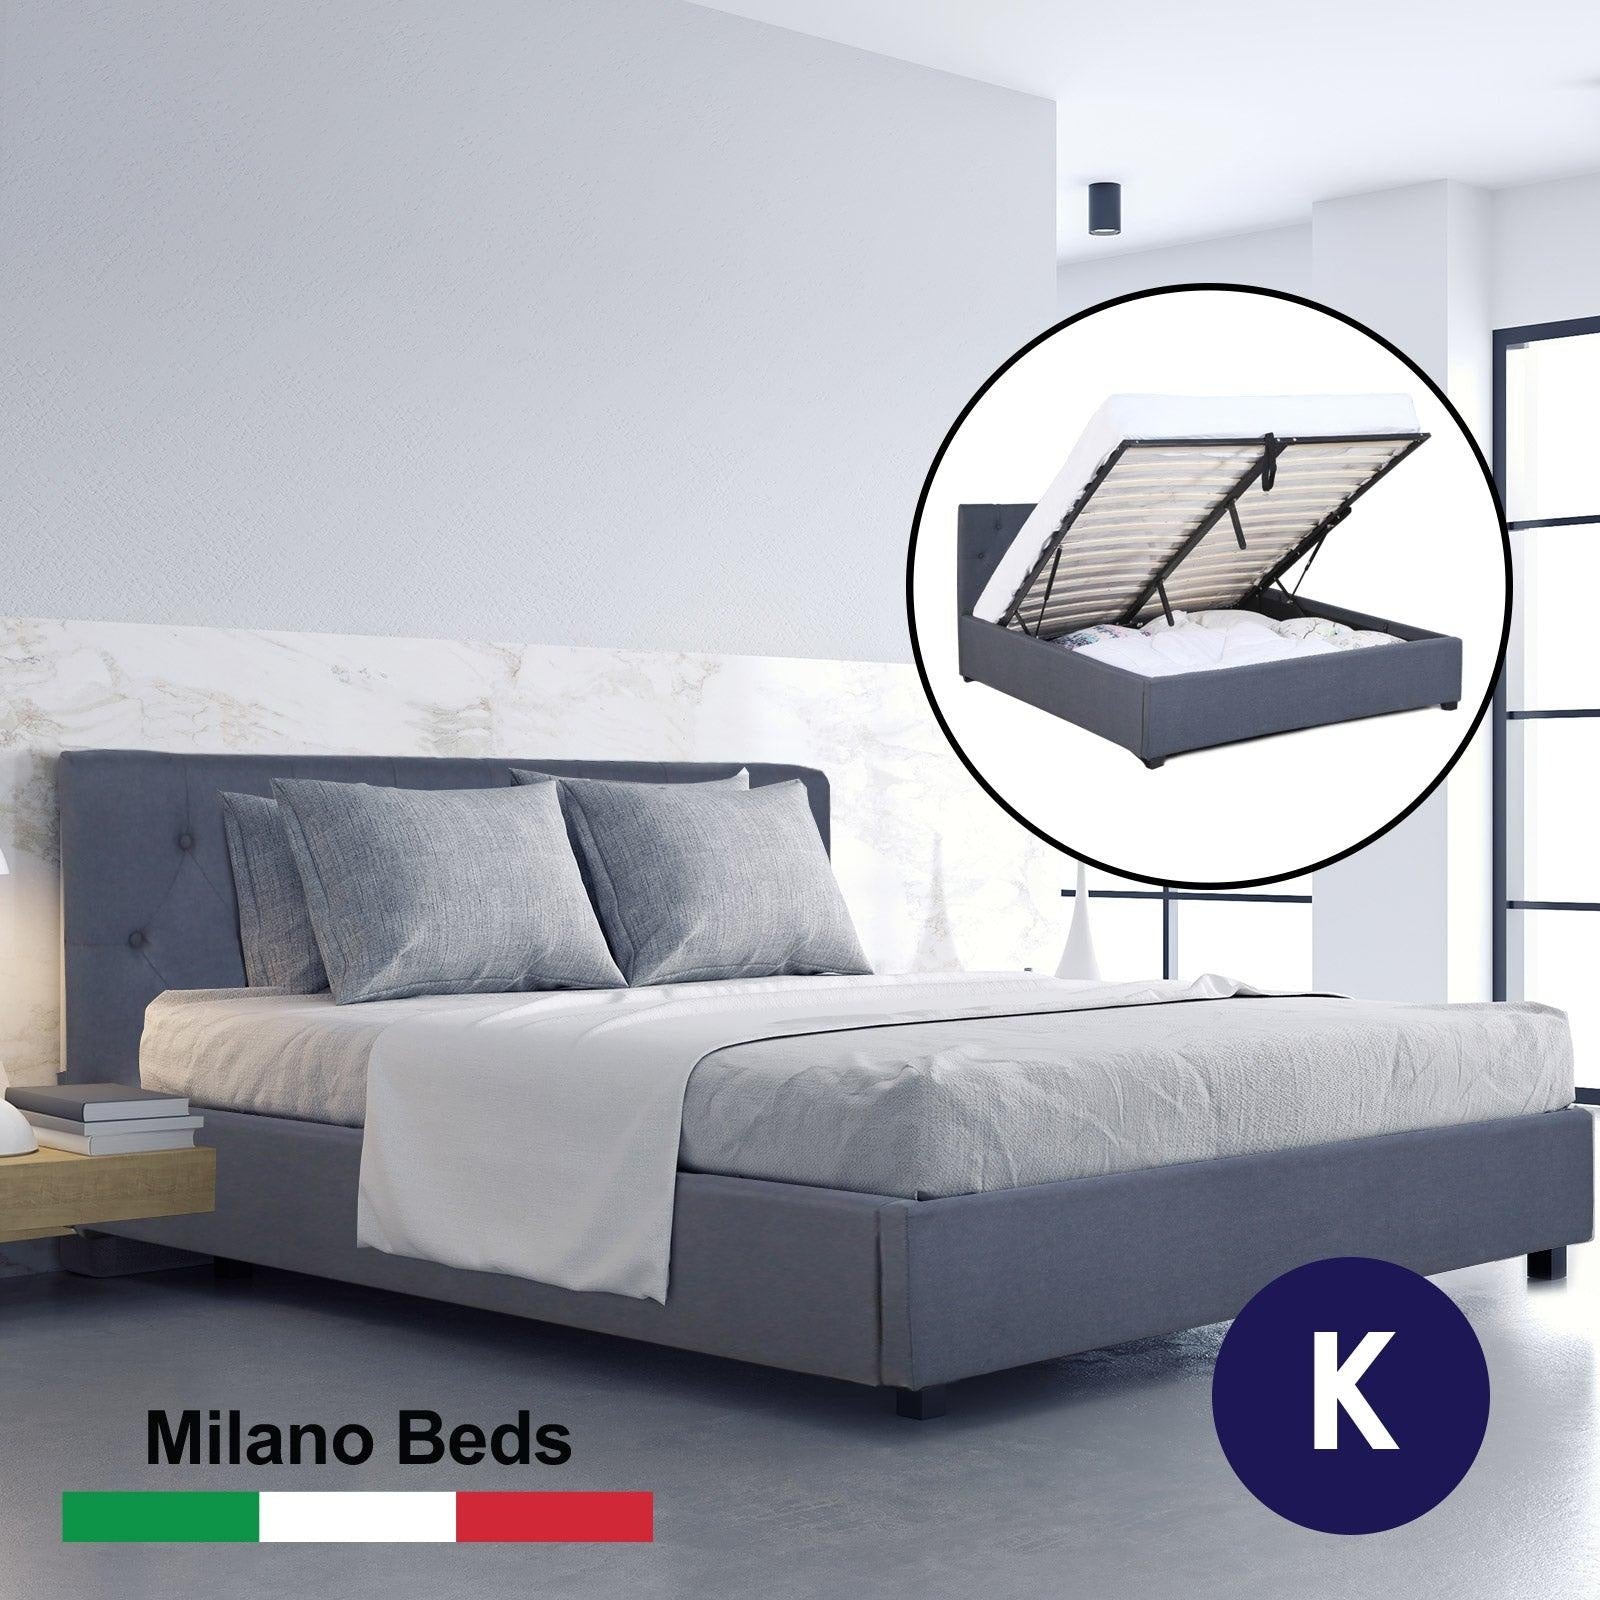 Milano Capri Luxury Gas Lift Bed Frame Base And Headboard With Storage All Sizes Charcoal King Deals499